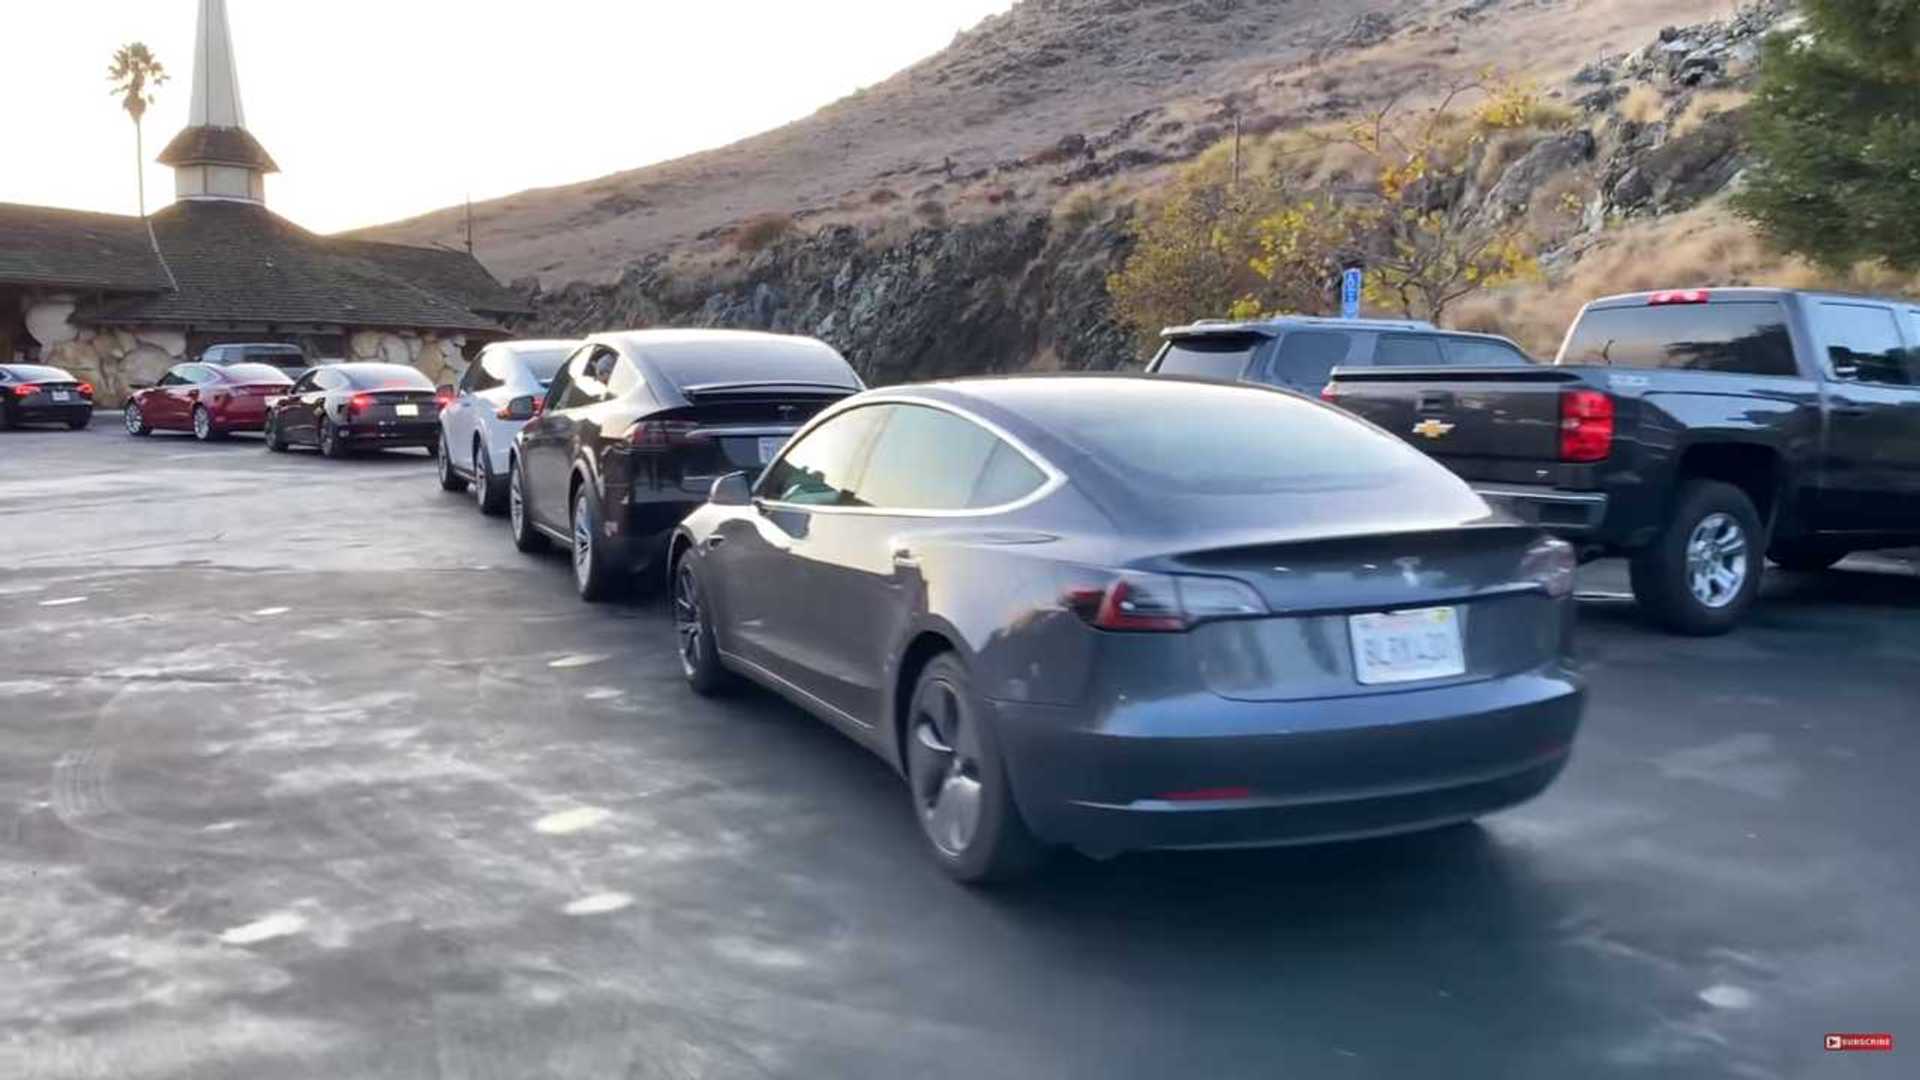 this-is-what-thanksgiving-caused-on-some-supercharger-stations-lines.jpg